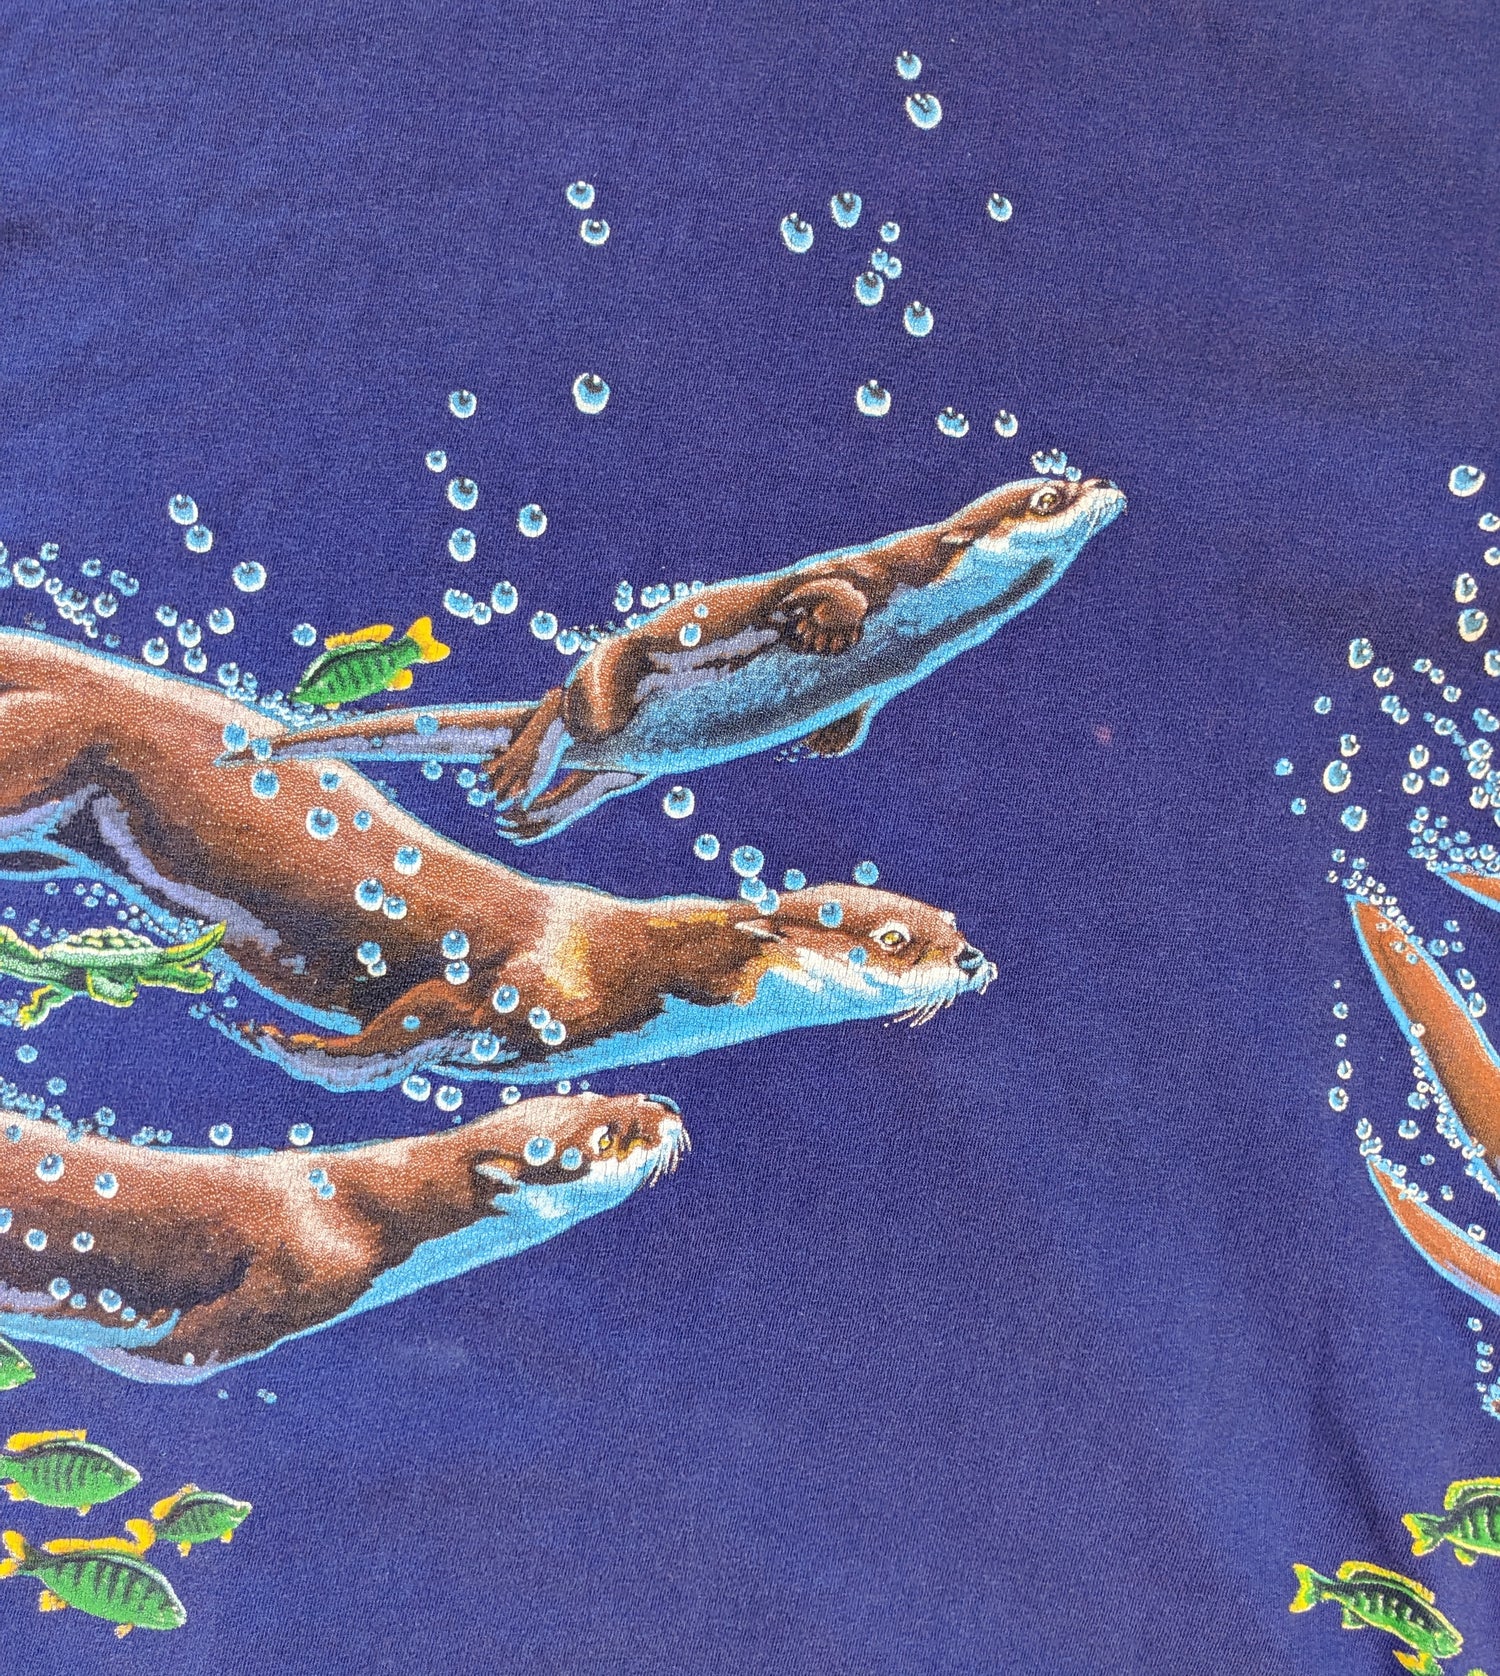 Purple Double Sided Underwater Otters Shirt close-up